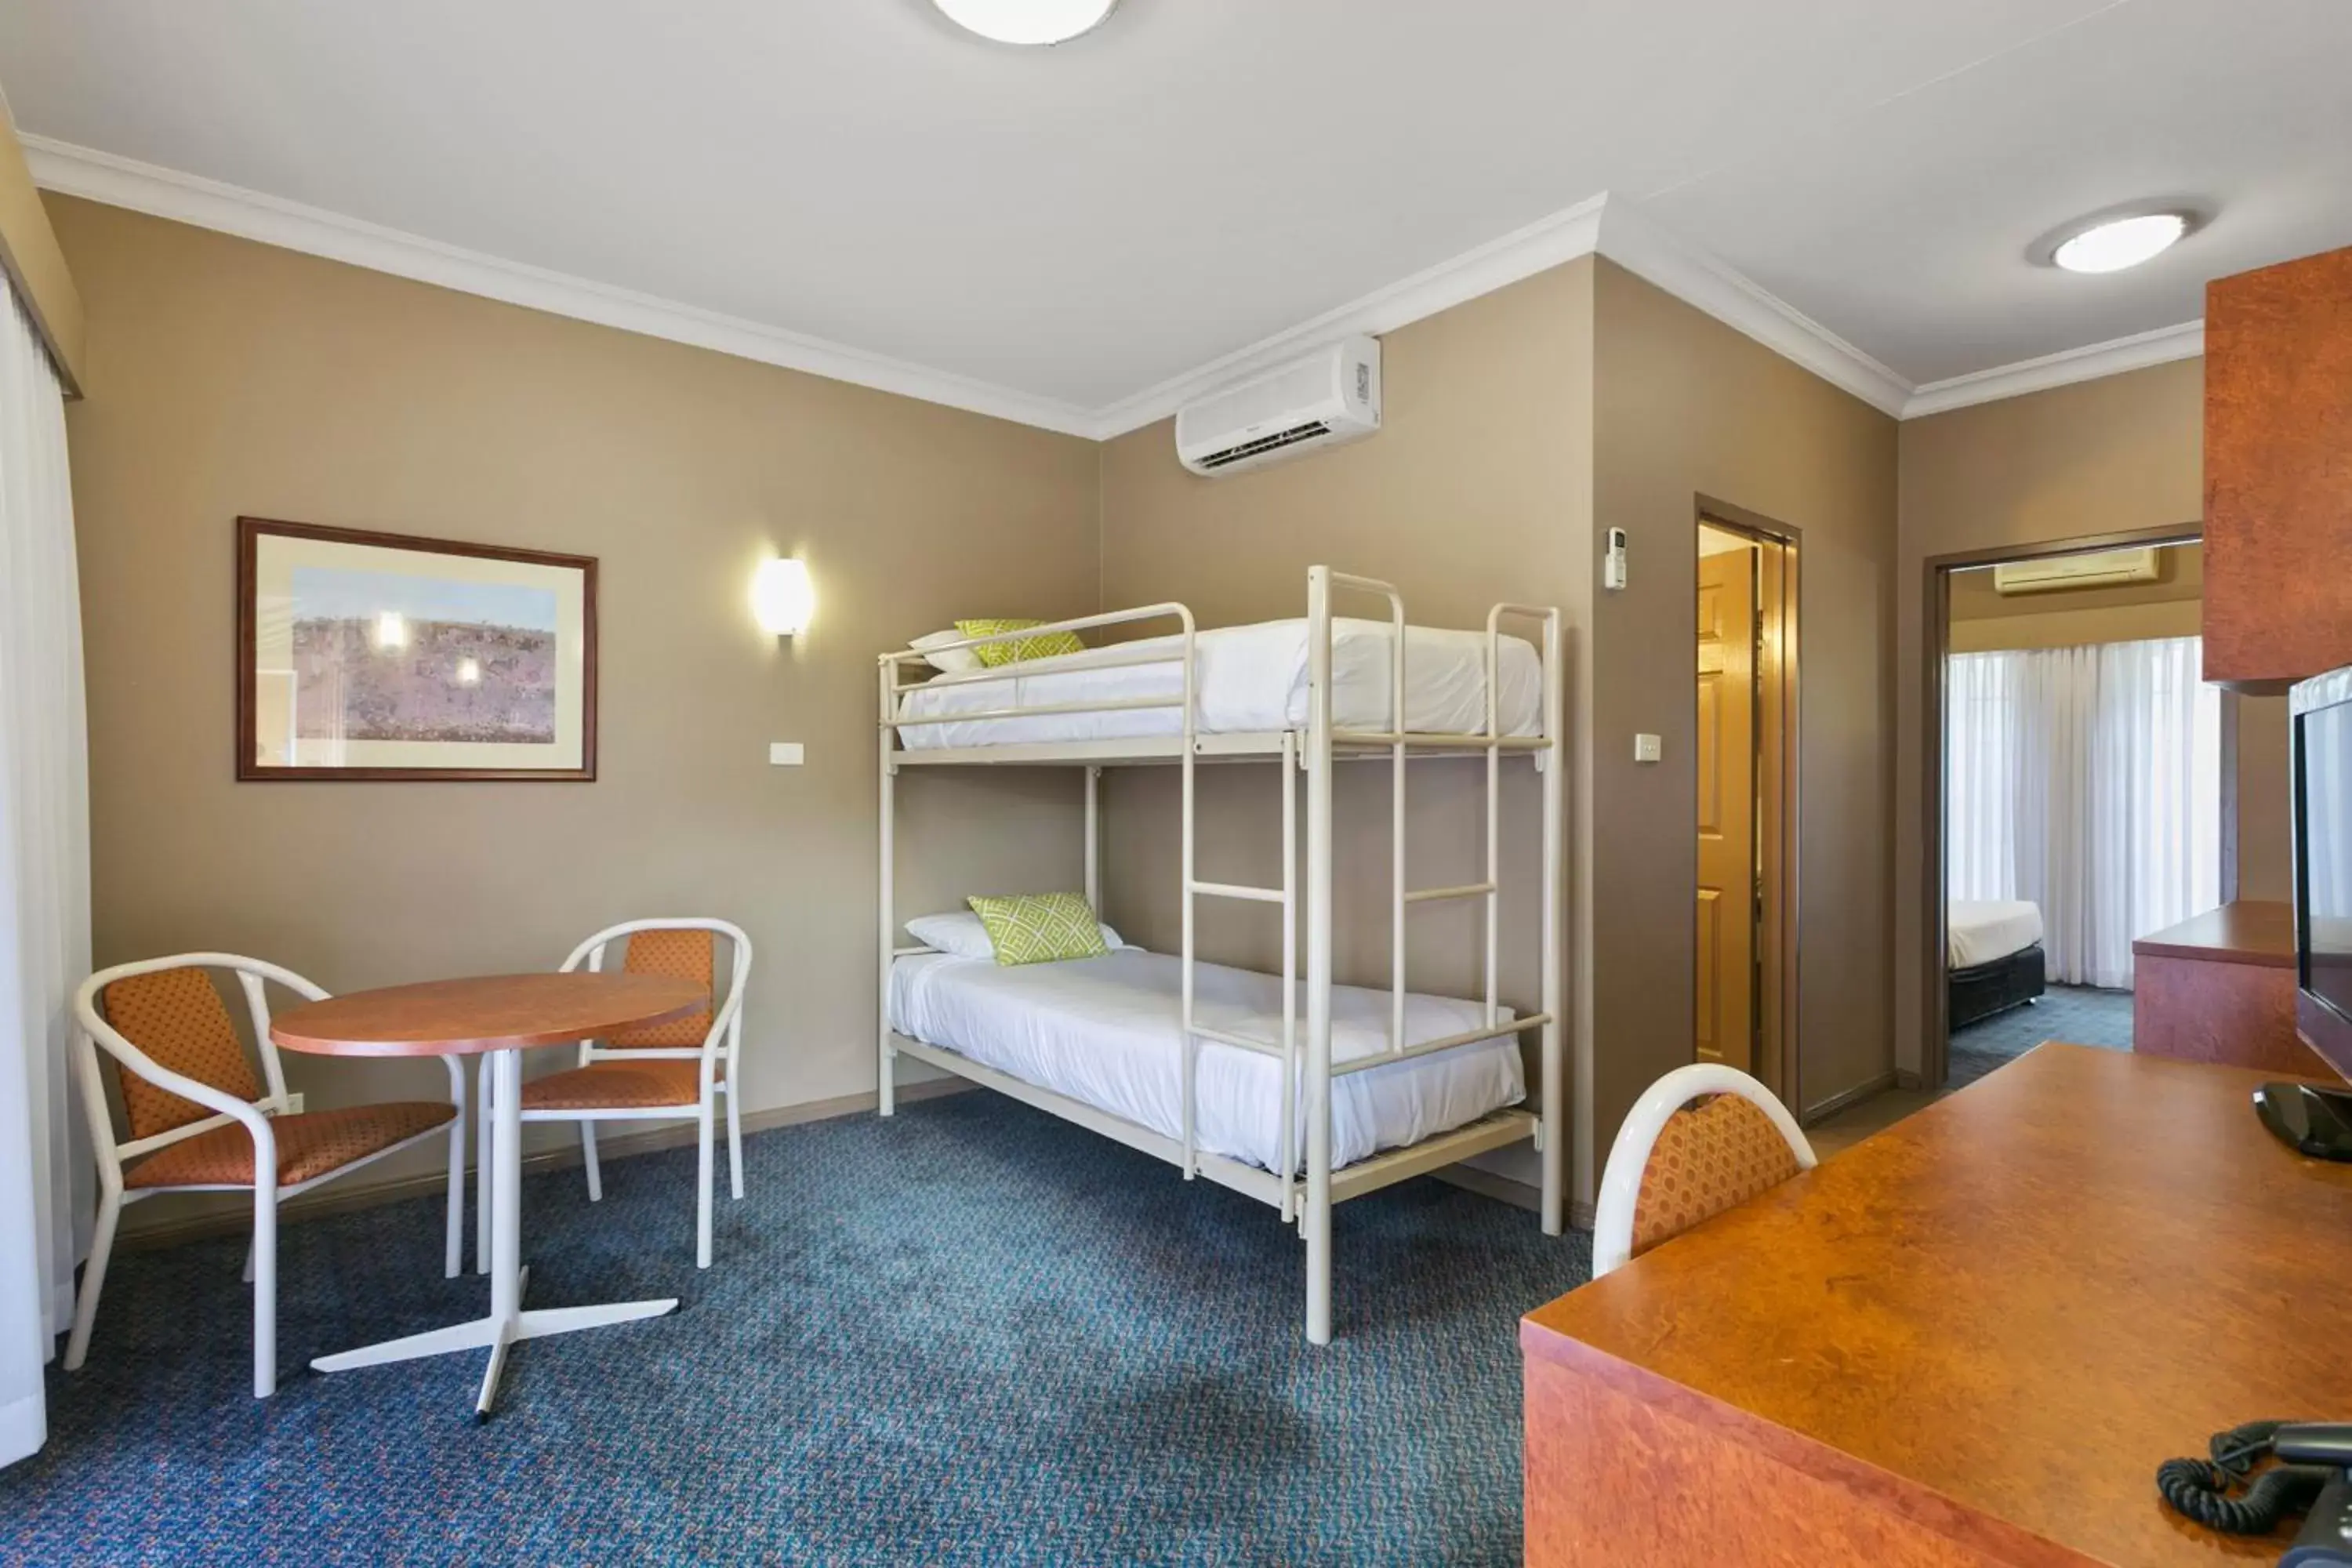 Bunk Bed in Quality Inn Penrith Sydney